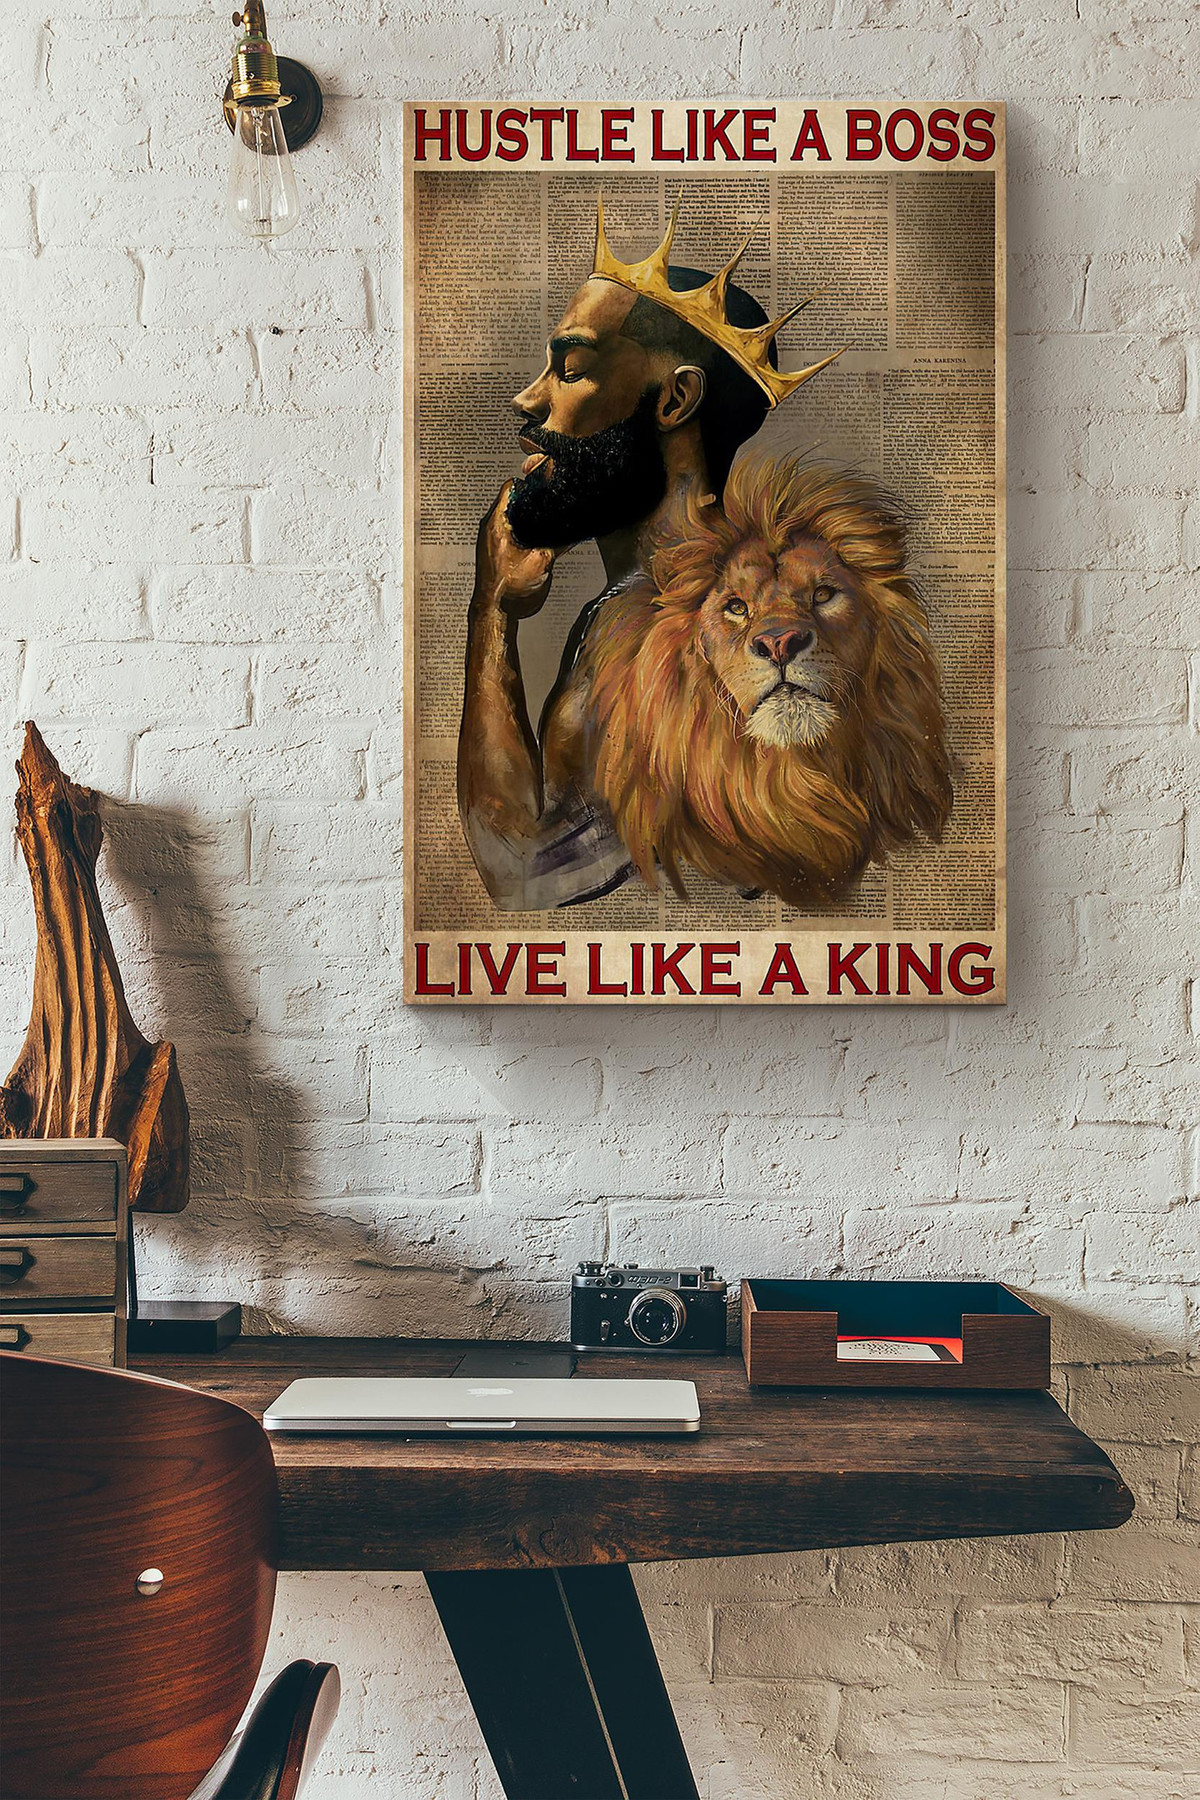 Afro Hustle Like A Boss Live Like A King Lion Dictionary Canvas Painting Ideas, Canvas Hanging Prints, Gift Idea Framed Prints, Canvas Paintings Wrapped Canvas 8x10